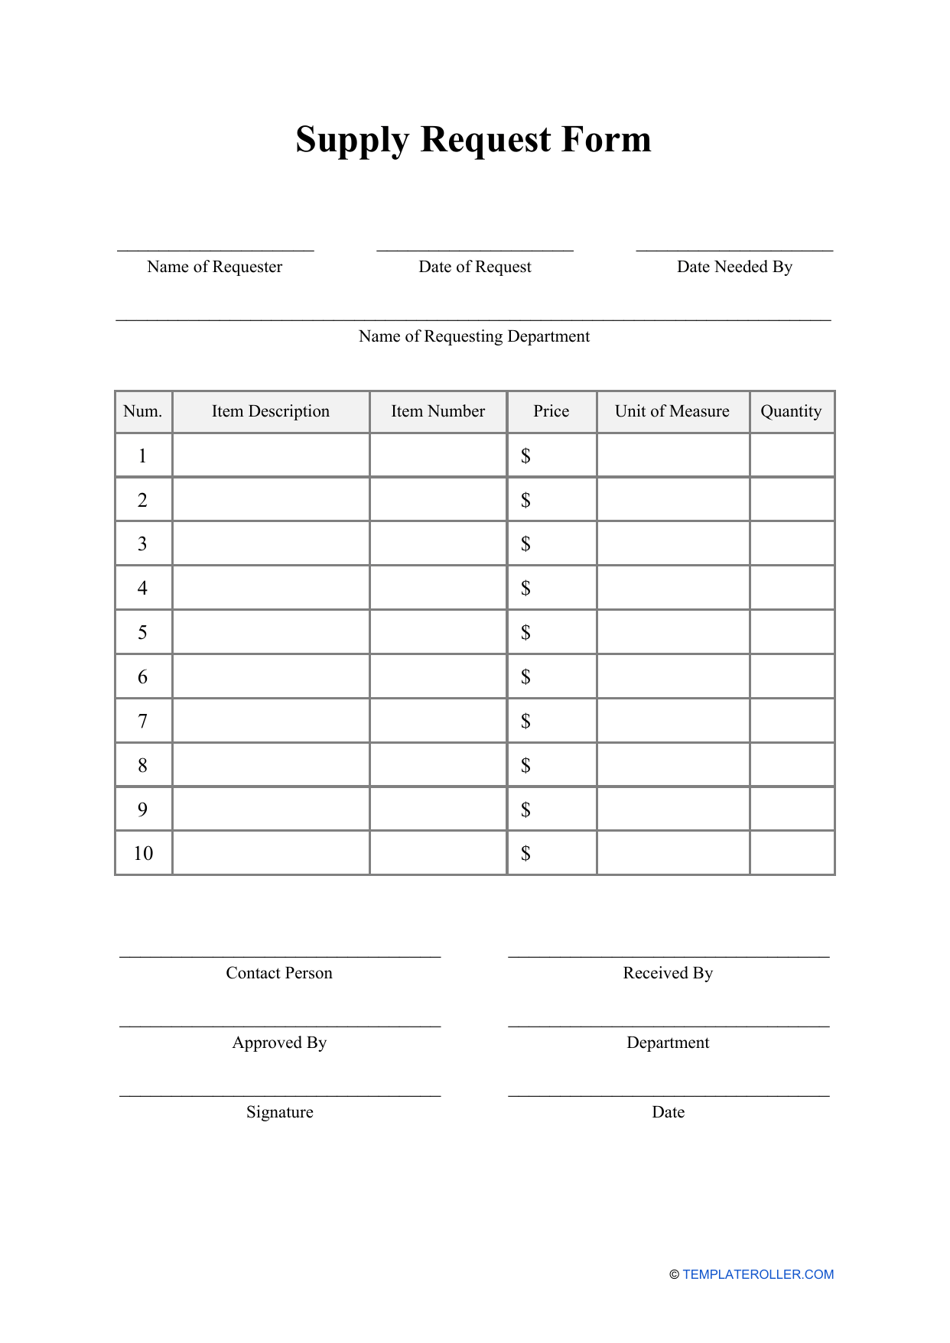 Supply Requisition Form Template